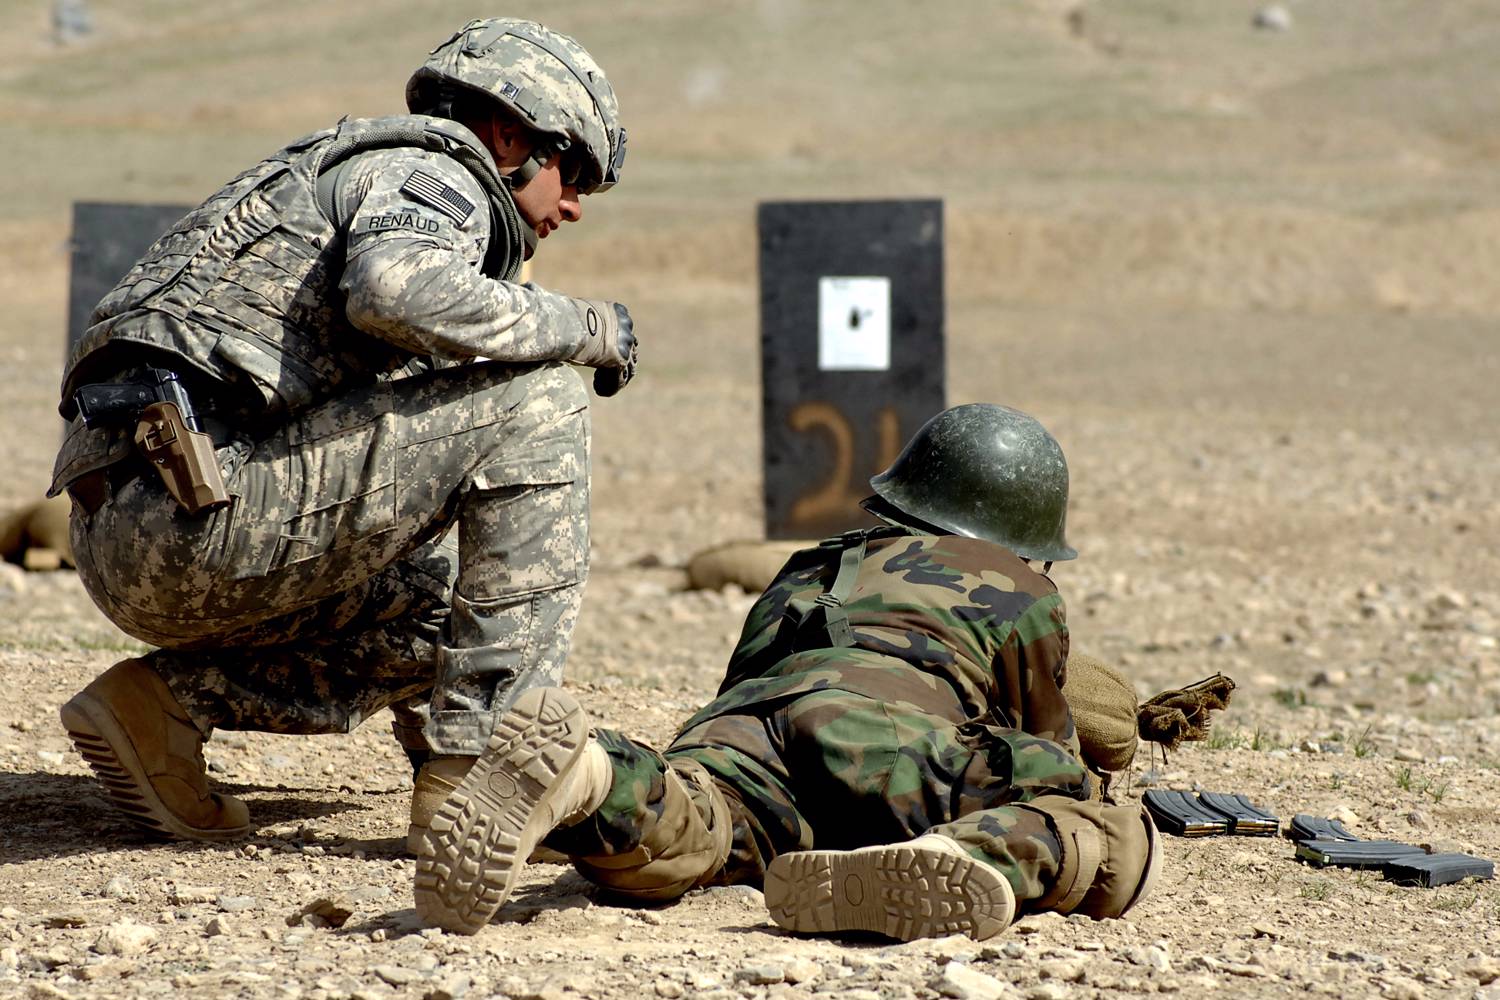 U.S. Army Staff Sgt. Derek Renaud, 34, of Angola, New York, looks on as an Afghan national army soldier tries zeroing his weapon at Kabul Military Training Center, March 17. Renaud, officer in charge of the range during qualification and zeroing of M16s, mentors ANA recruits as they learn to use their new M16s. He's a member of the Camp Alamo Mentor Group's Basic Warrior Training branch. Photo by Guy Volb. U.S. Army